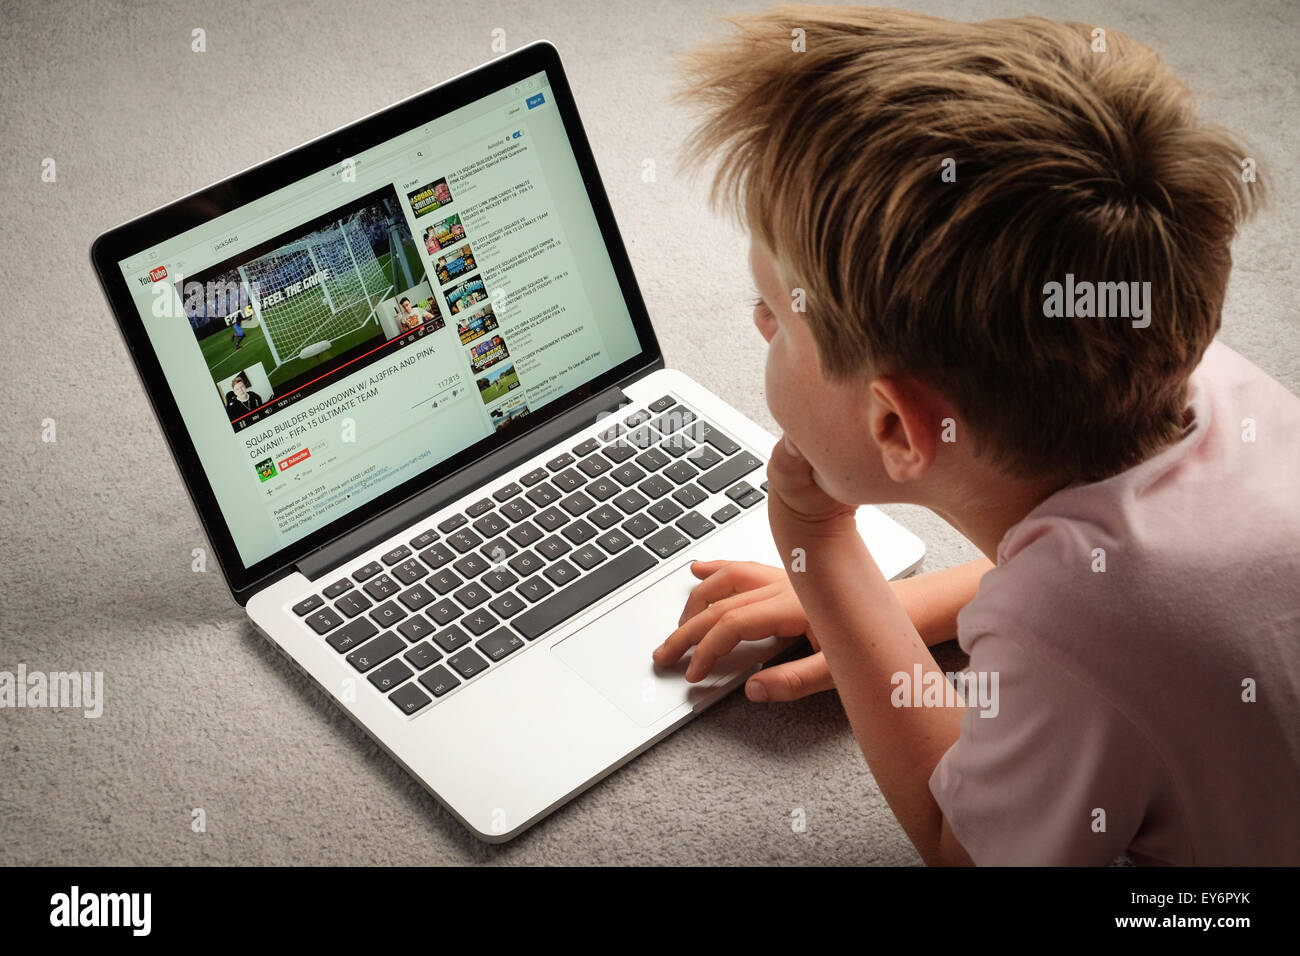 A Child watching Youtube videos on a laptop computer Stock Photo